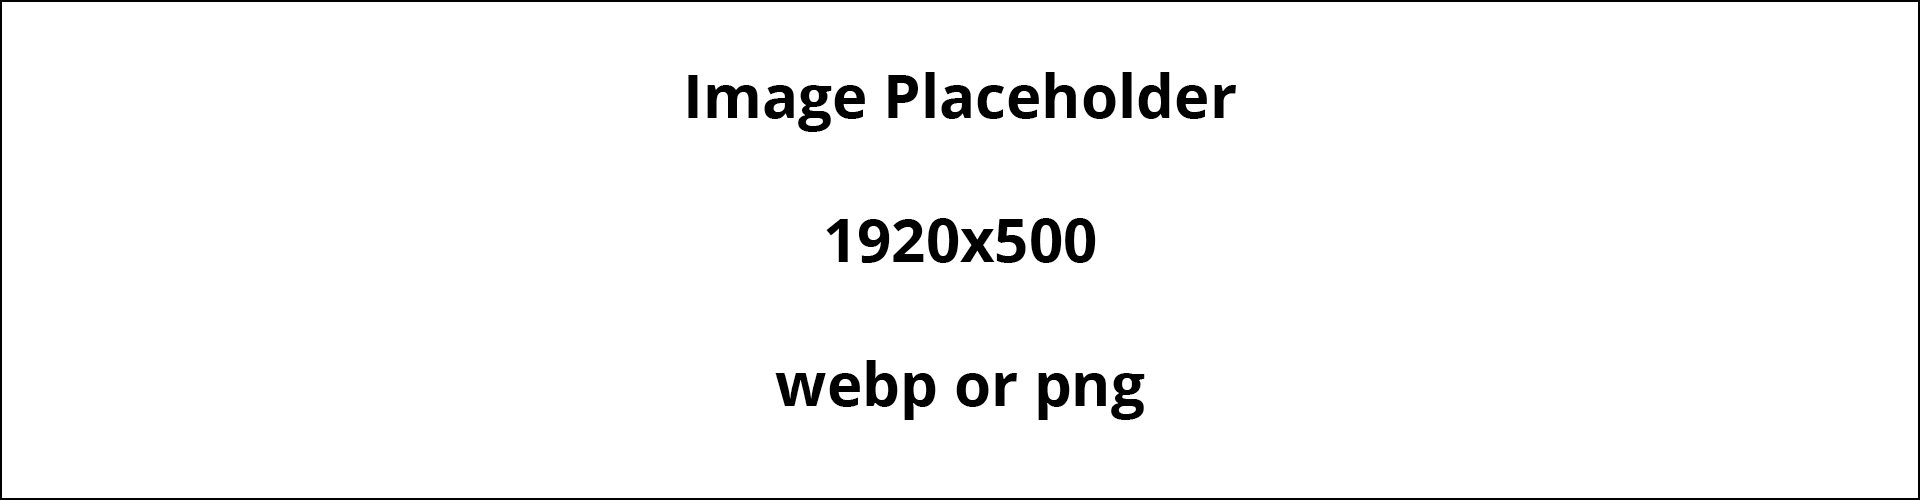 Placeholder_1920x500